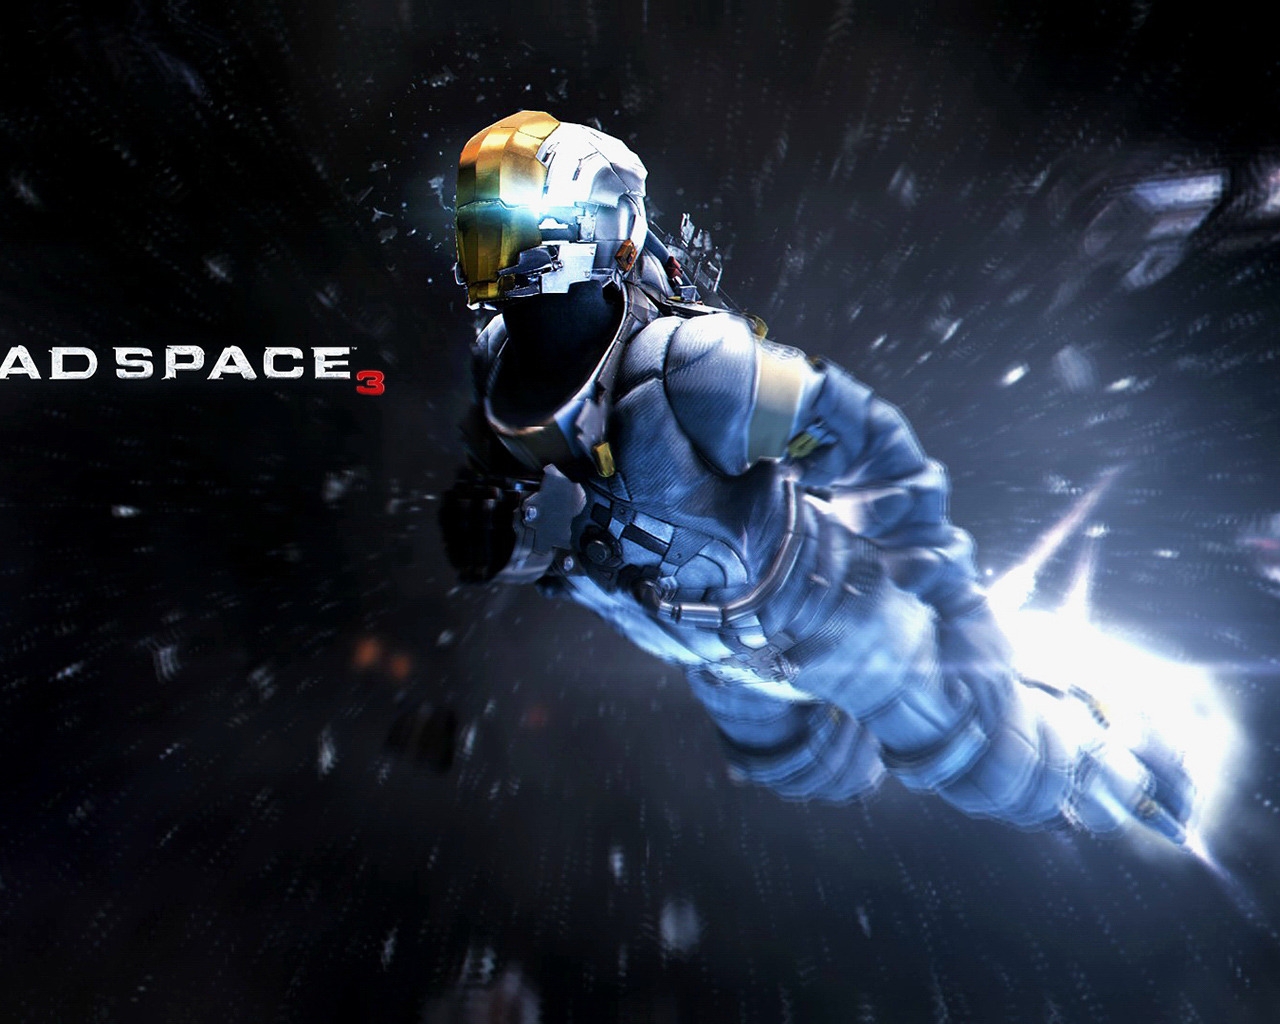 Dead Space 3 Game for 1280 x 1024 resolution